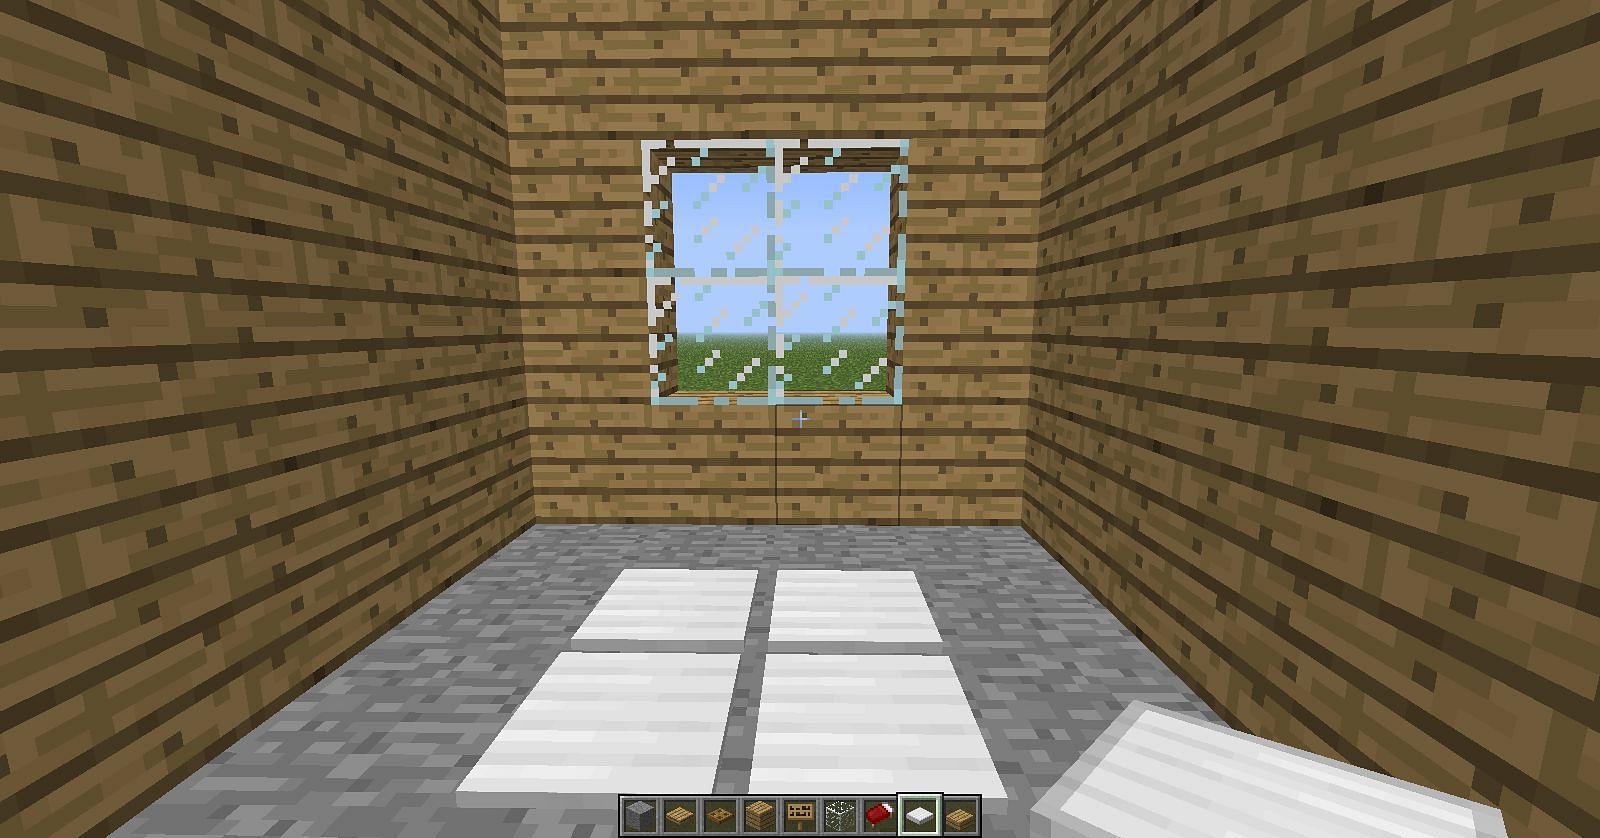 A player uses iron pressure plates to create the illusion of sunlight casted on a floor through a window (Image via Mojang)